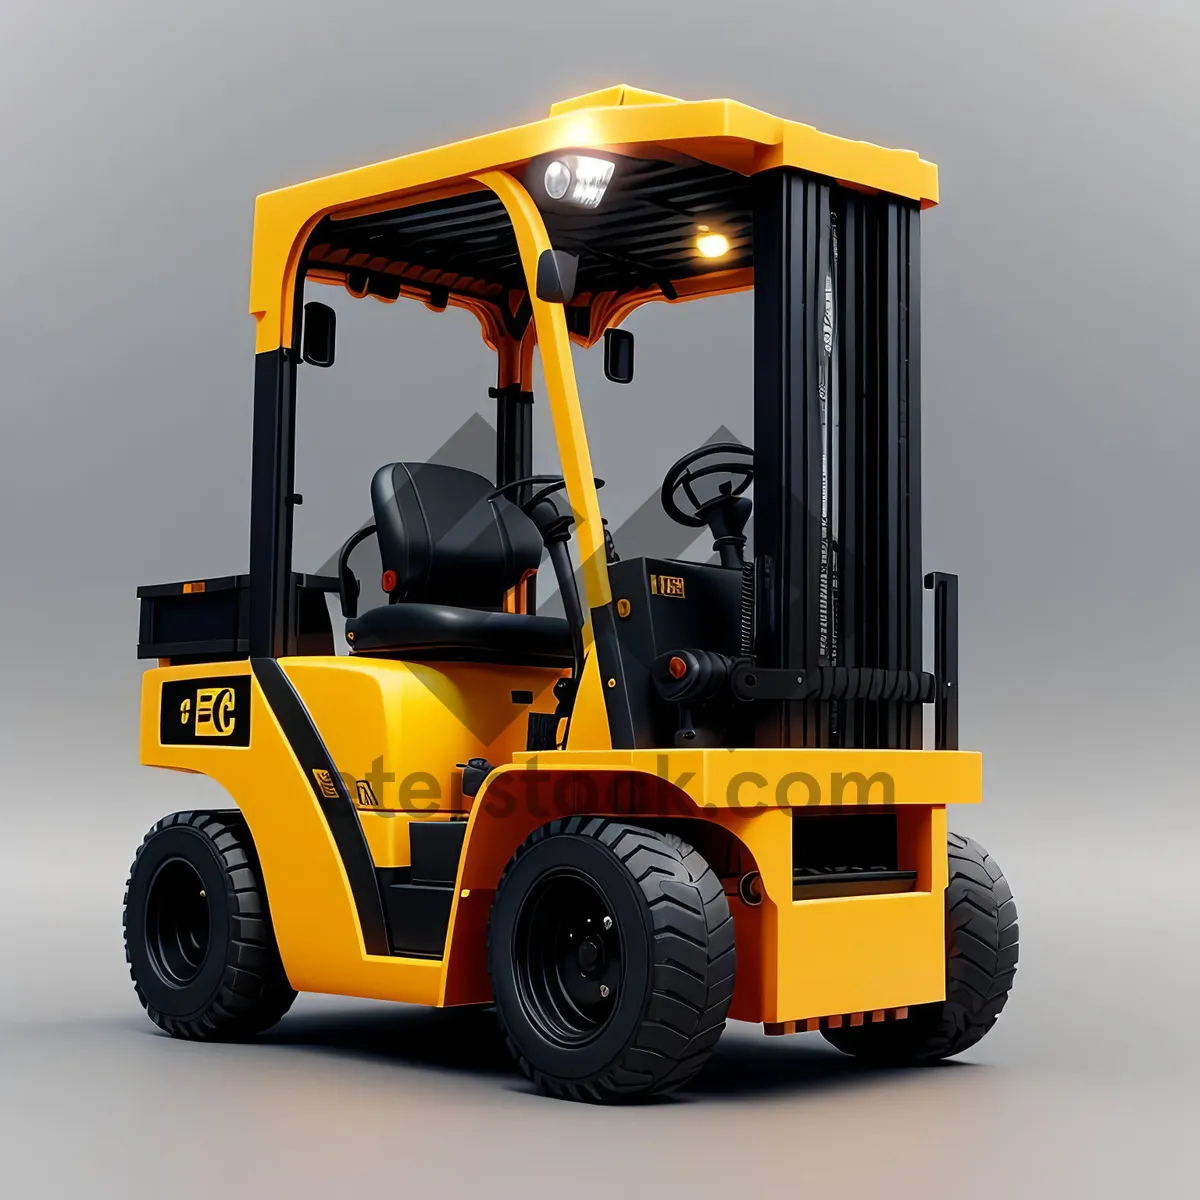 Picture of Heavy-Duty Forklift Truck: Efficient Industry Transportation Solution